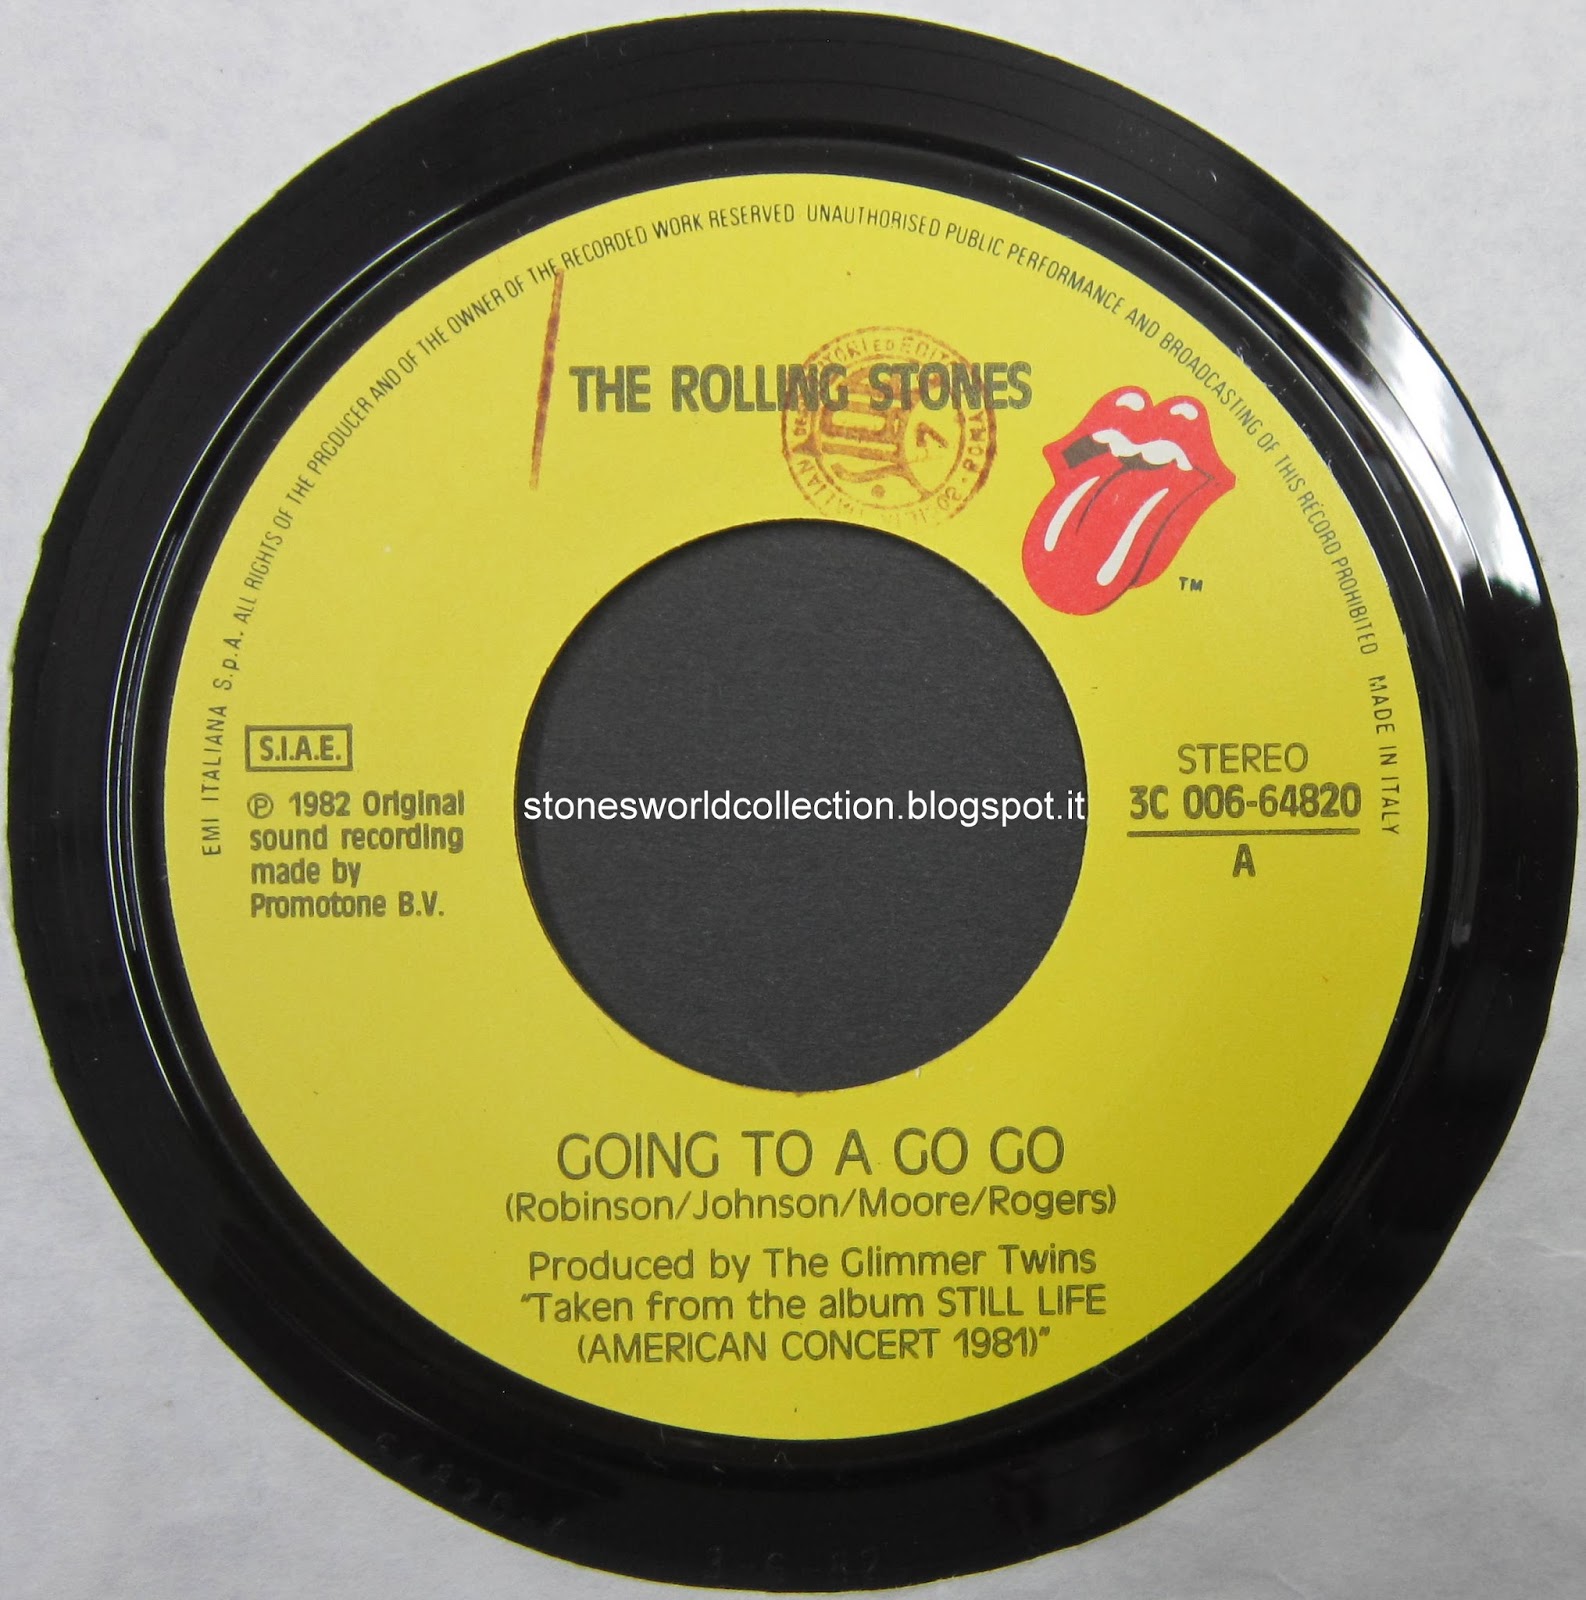 Stonesworldcollection Going To A Go Go Beast Of Burden Bonus Track Not Included In The Album Still Life Italy Rsr Fist Pressing With Es Small Logo On Back Cover